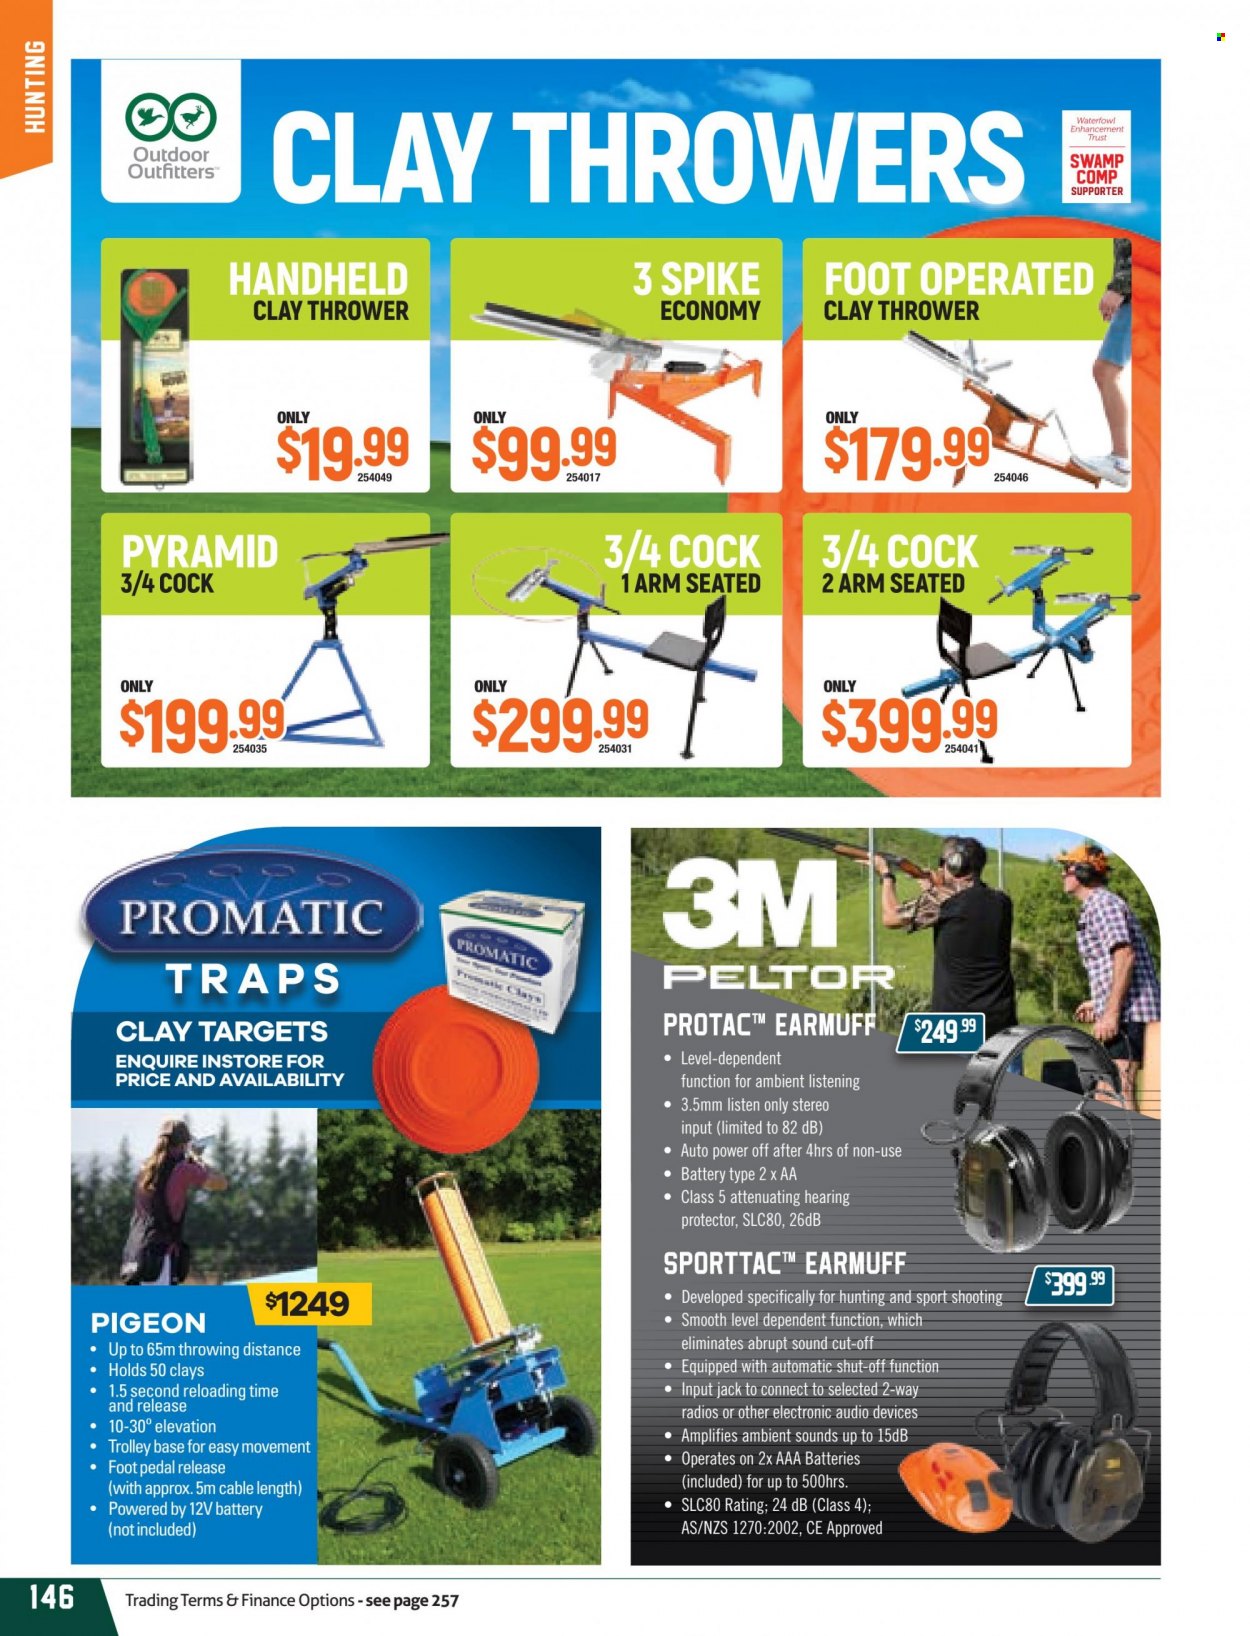 Hunting & Fishing mailer - Sales products - Pigeon. Page 146.